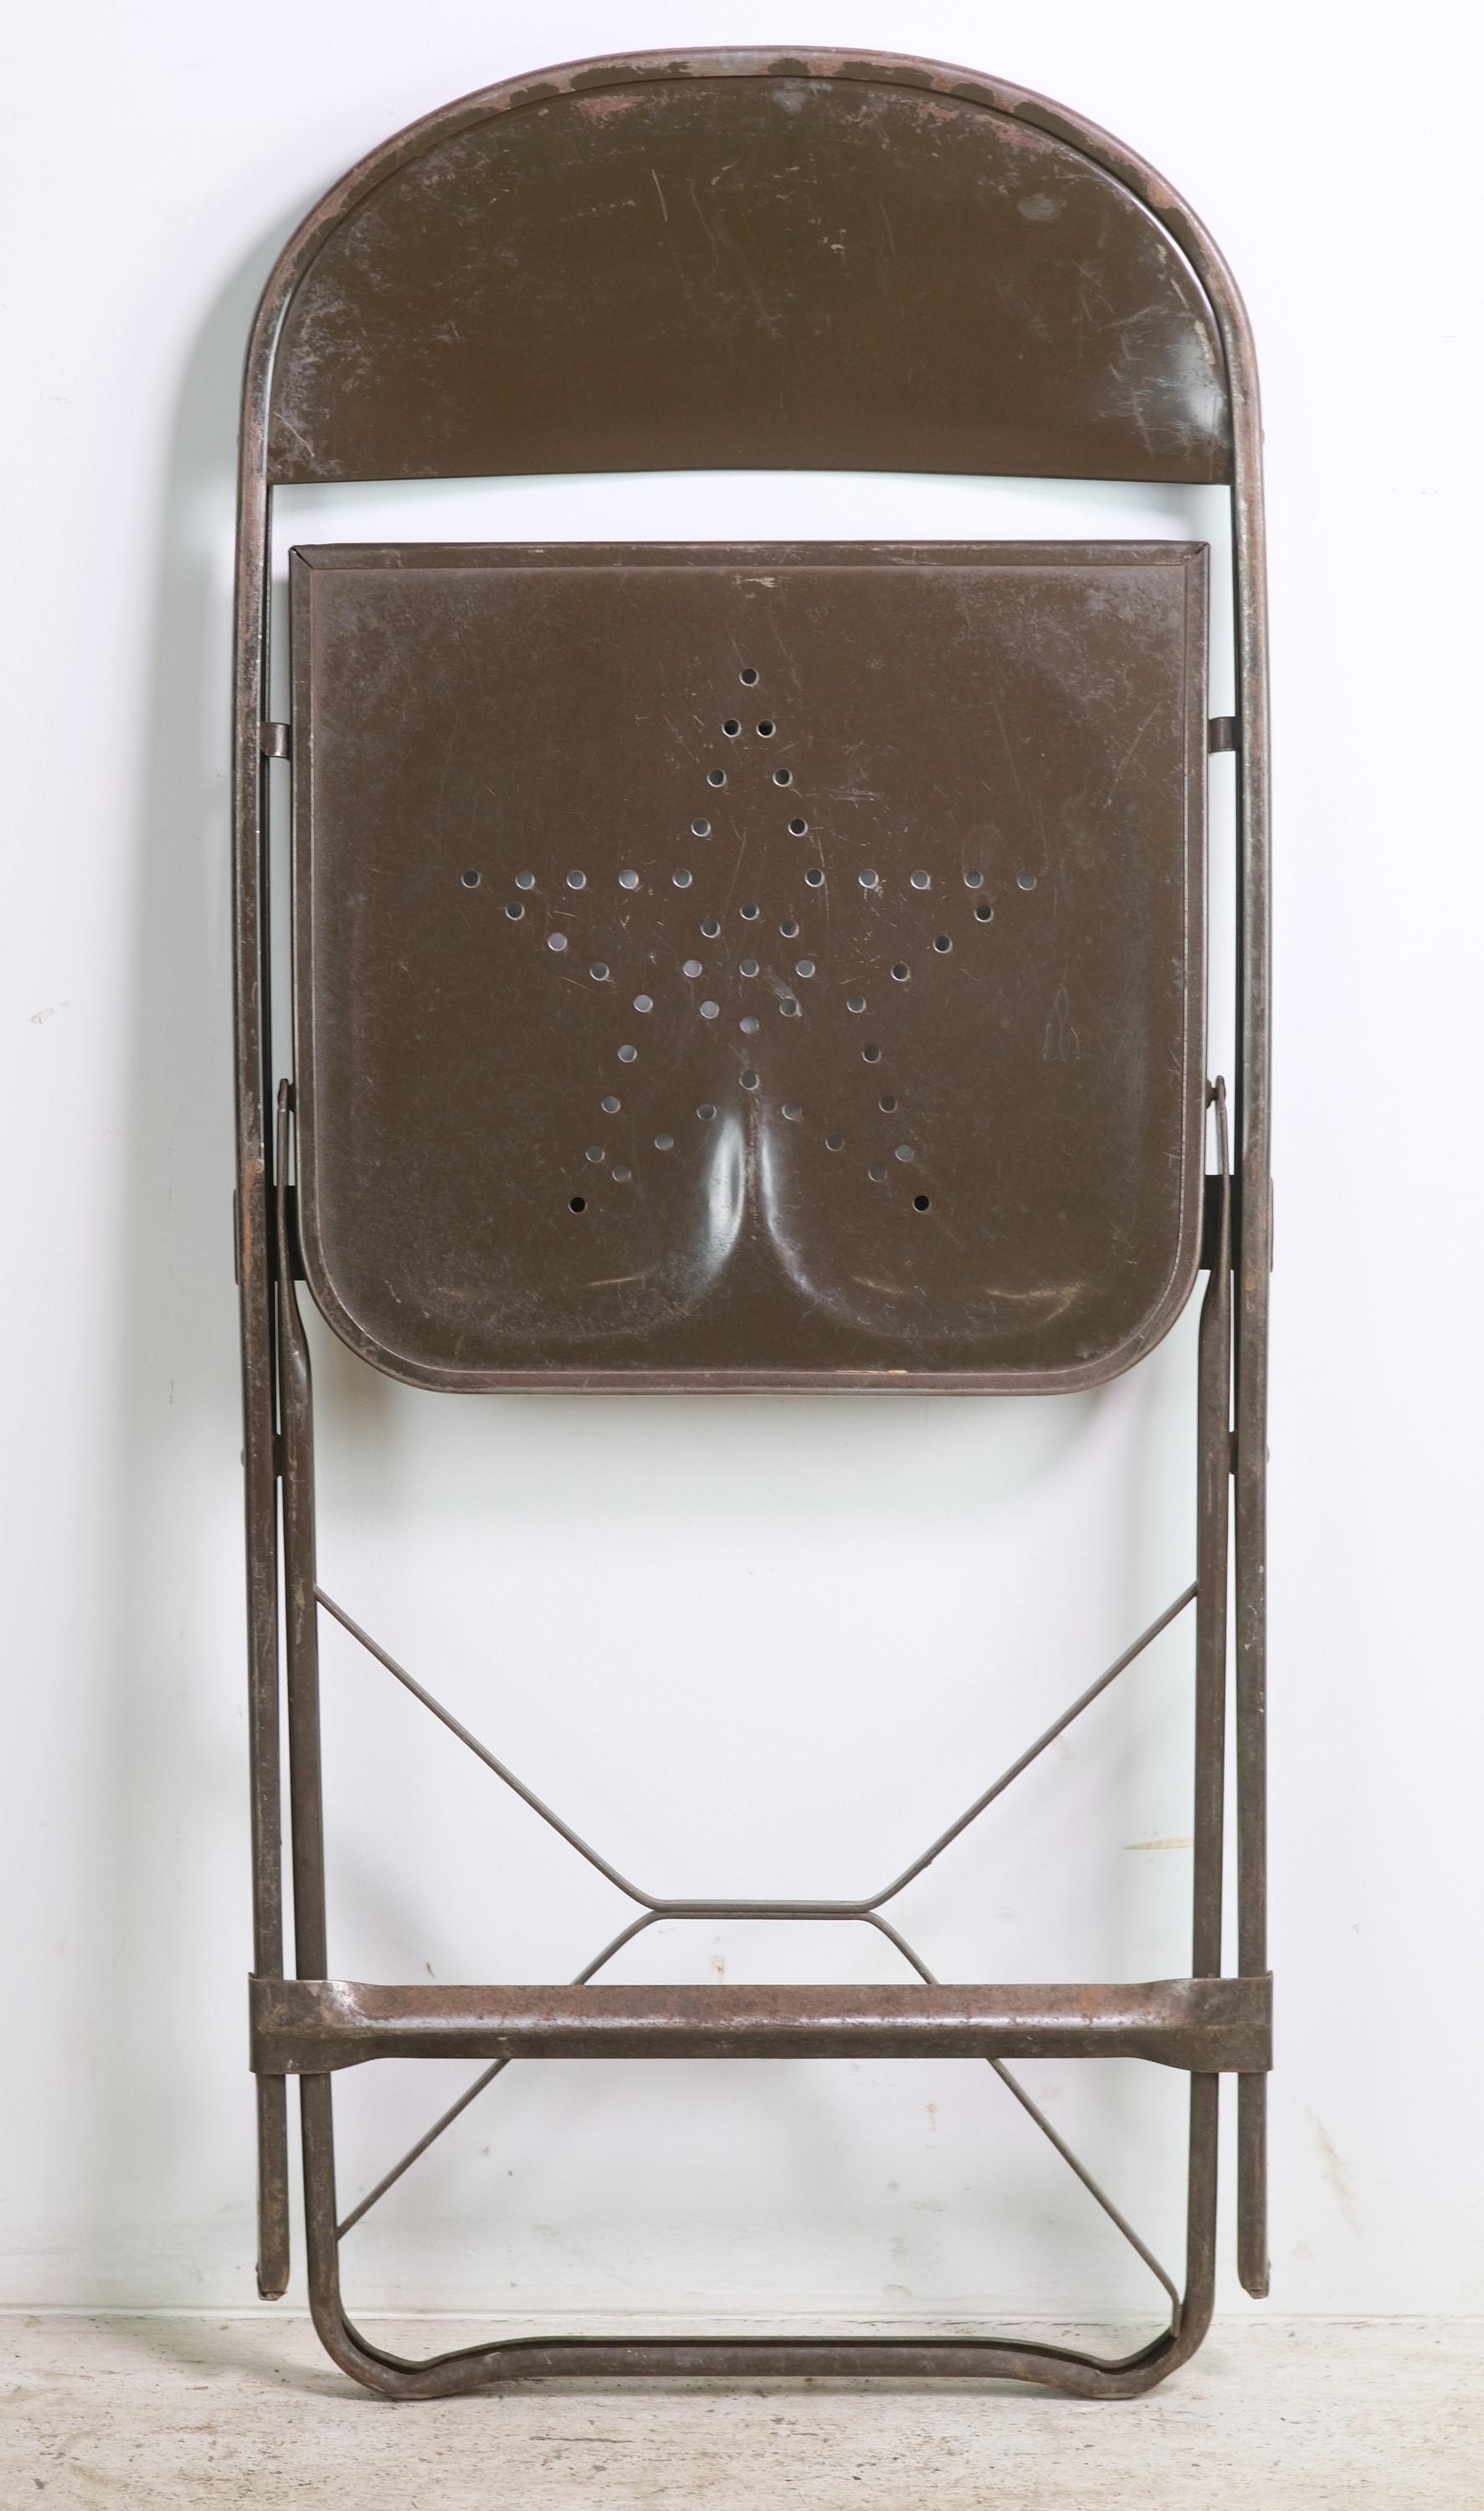 20th Century Brown Steel Folding Chair w Star Design Seat Qty Available